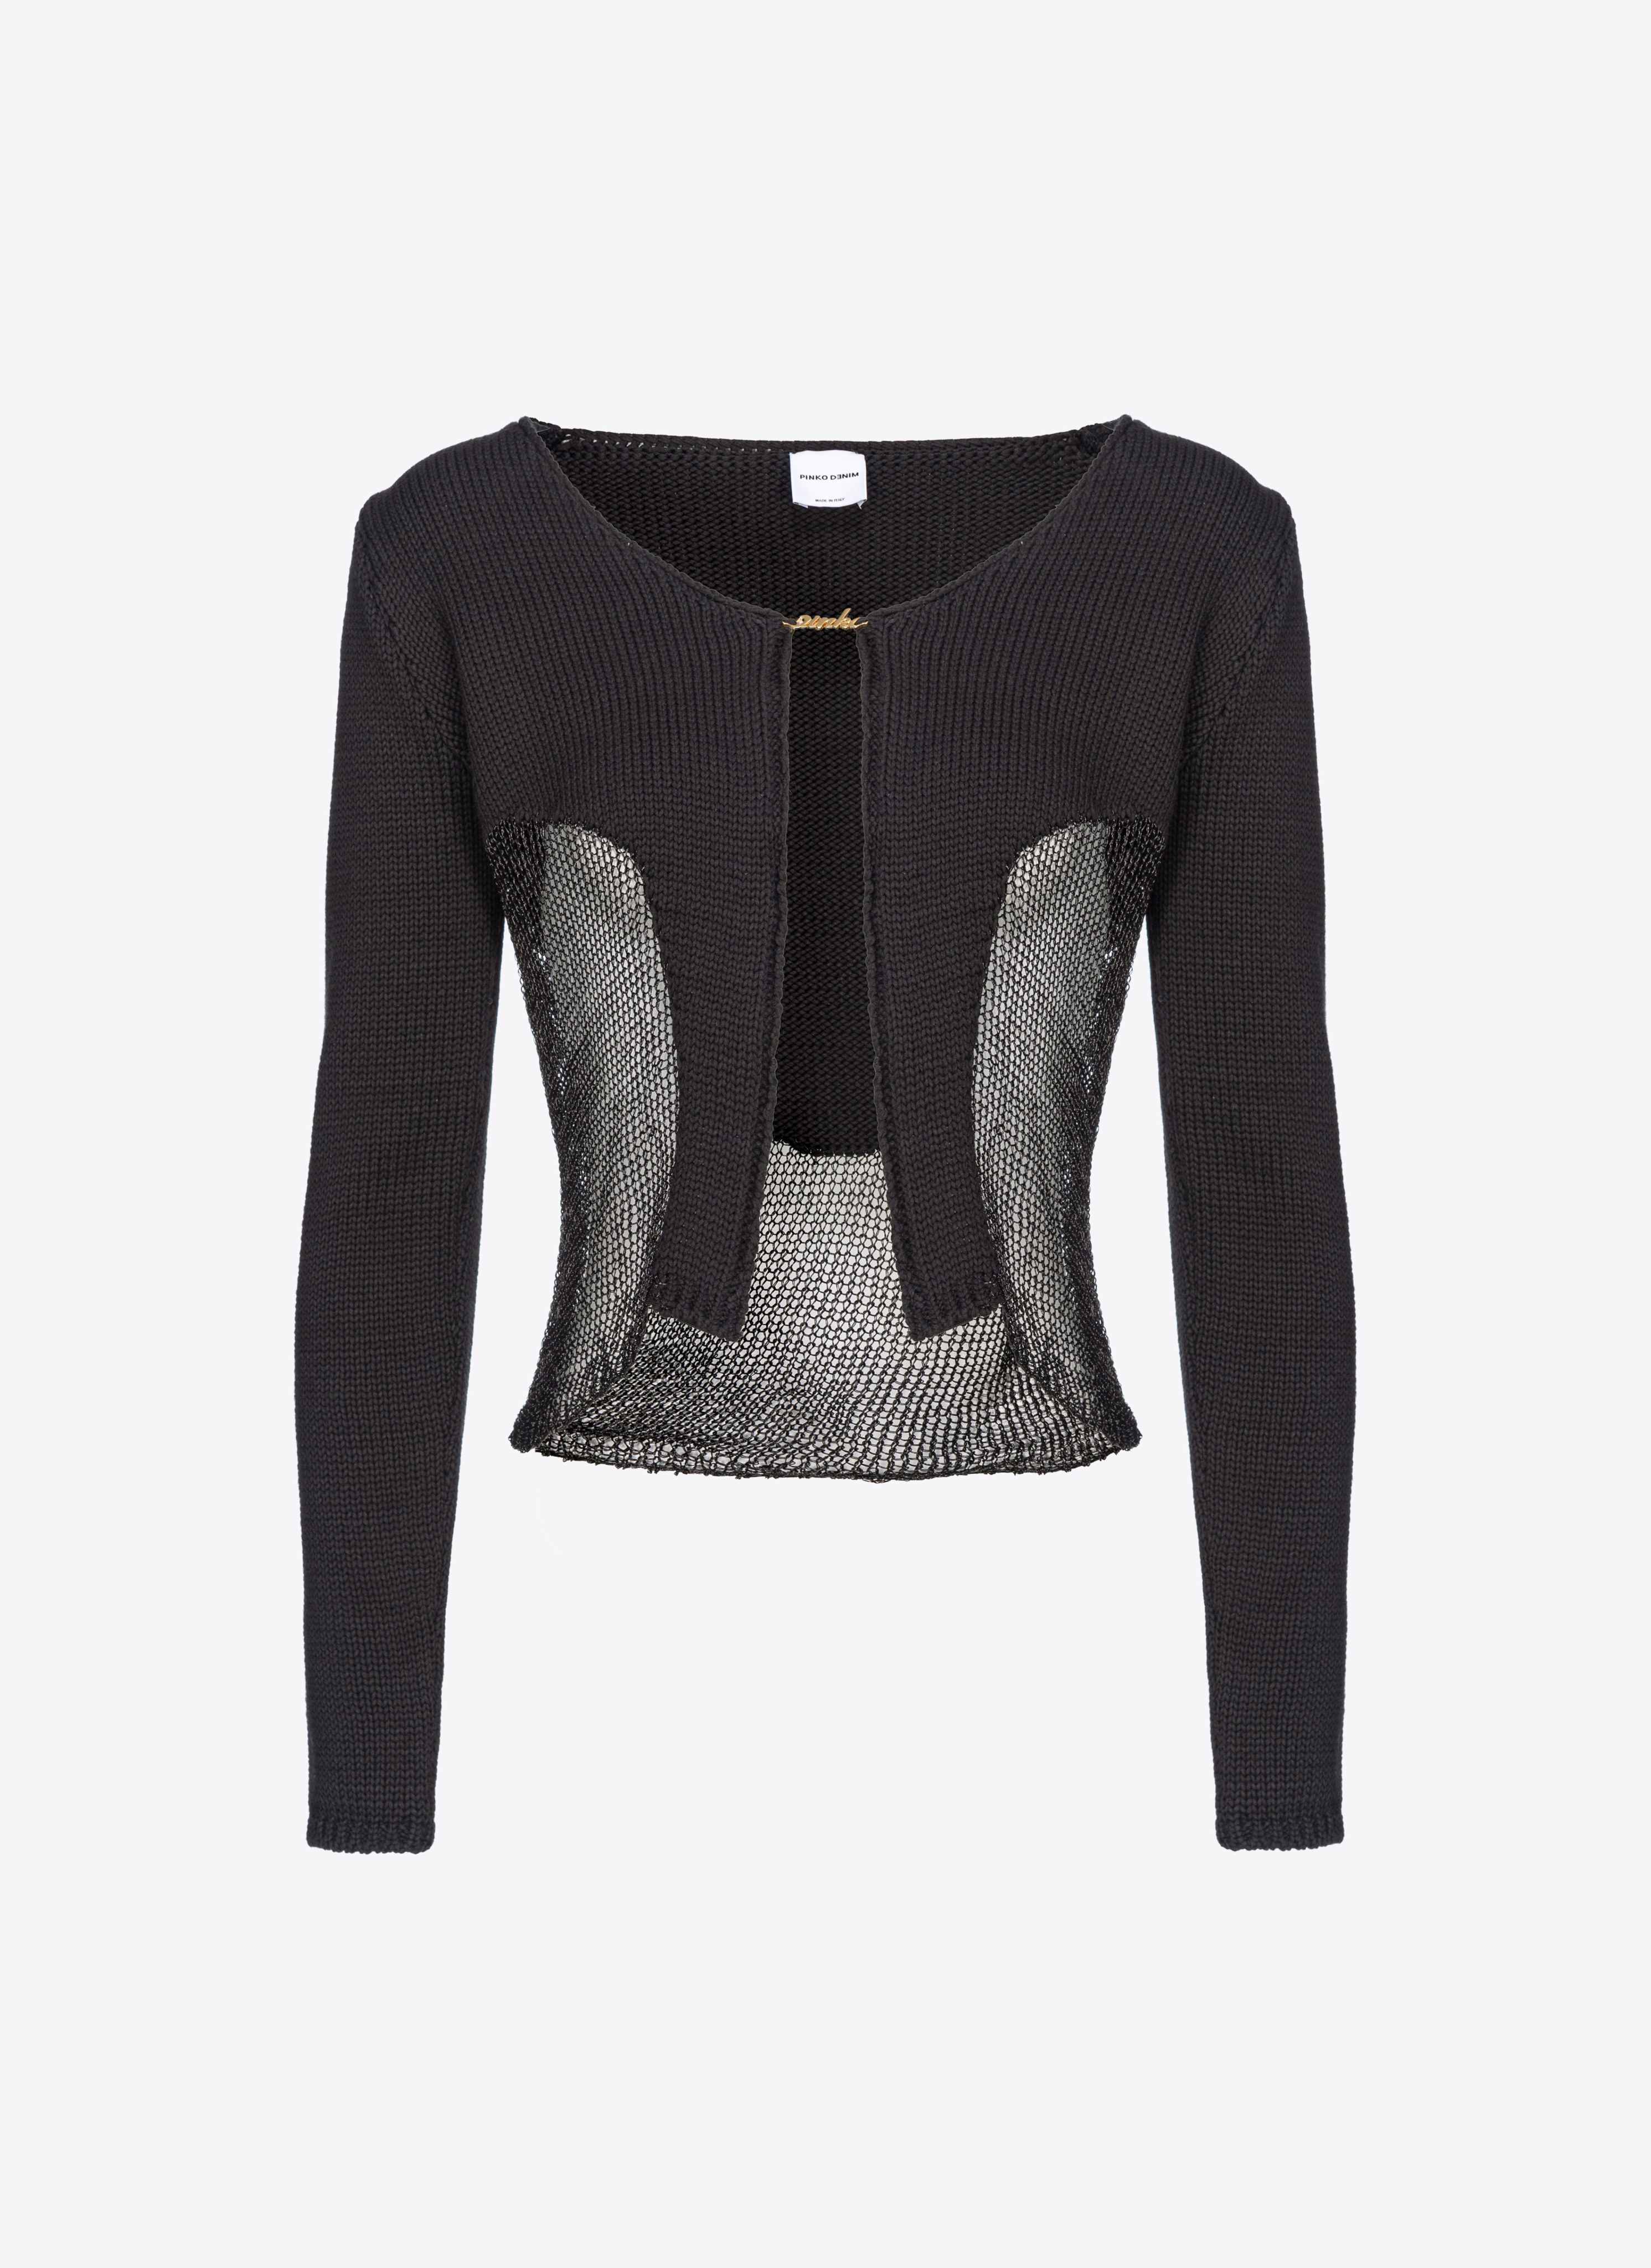 Pinko Mesh Sweater With Patch In Noir Limousine